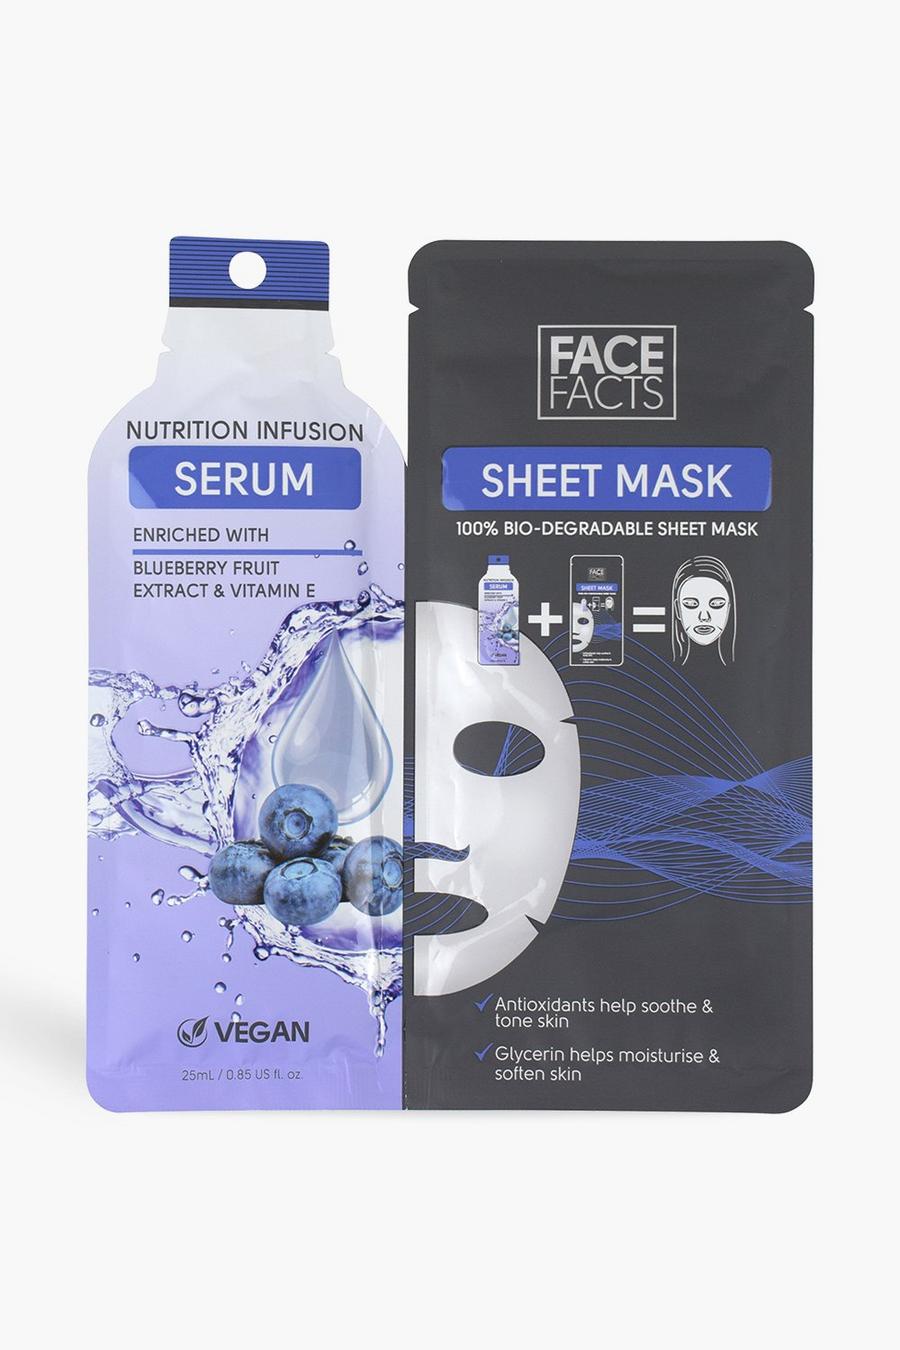 Blue Face Facts Serum Sheet Mask Nutrition Infuse